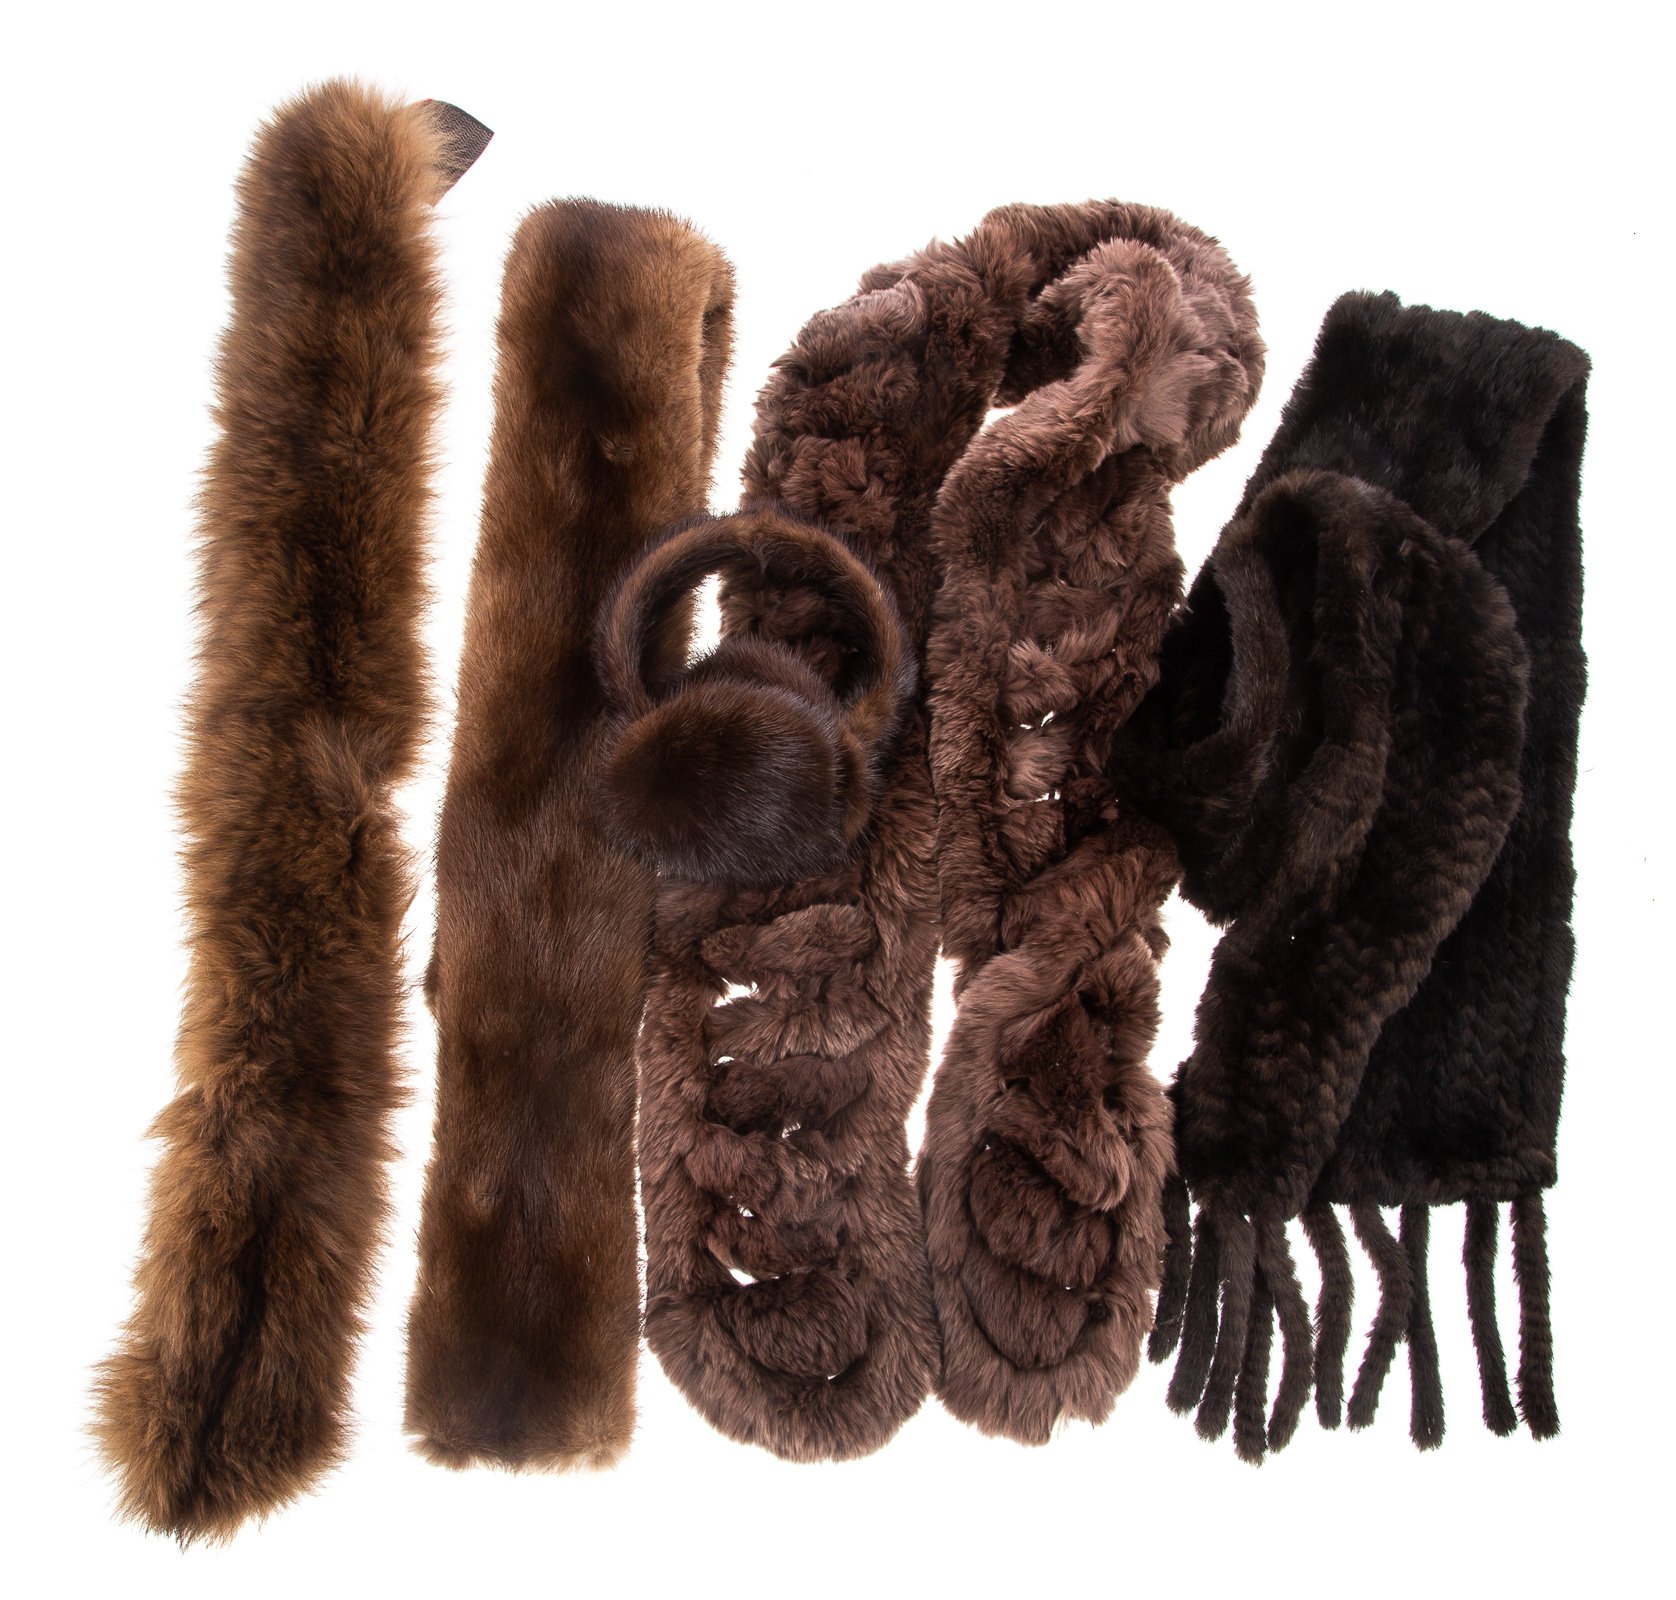 GROUP OF FUR ACCESSORIES including 33735c